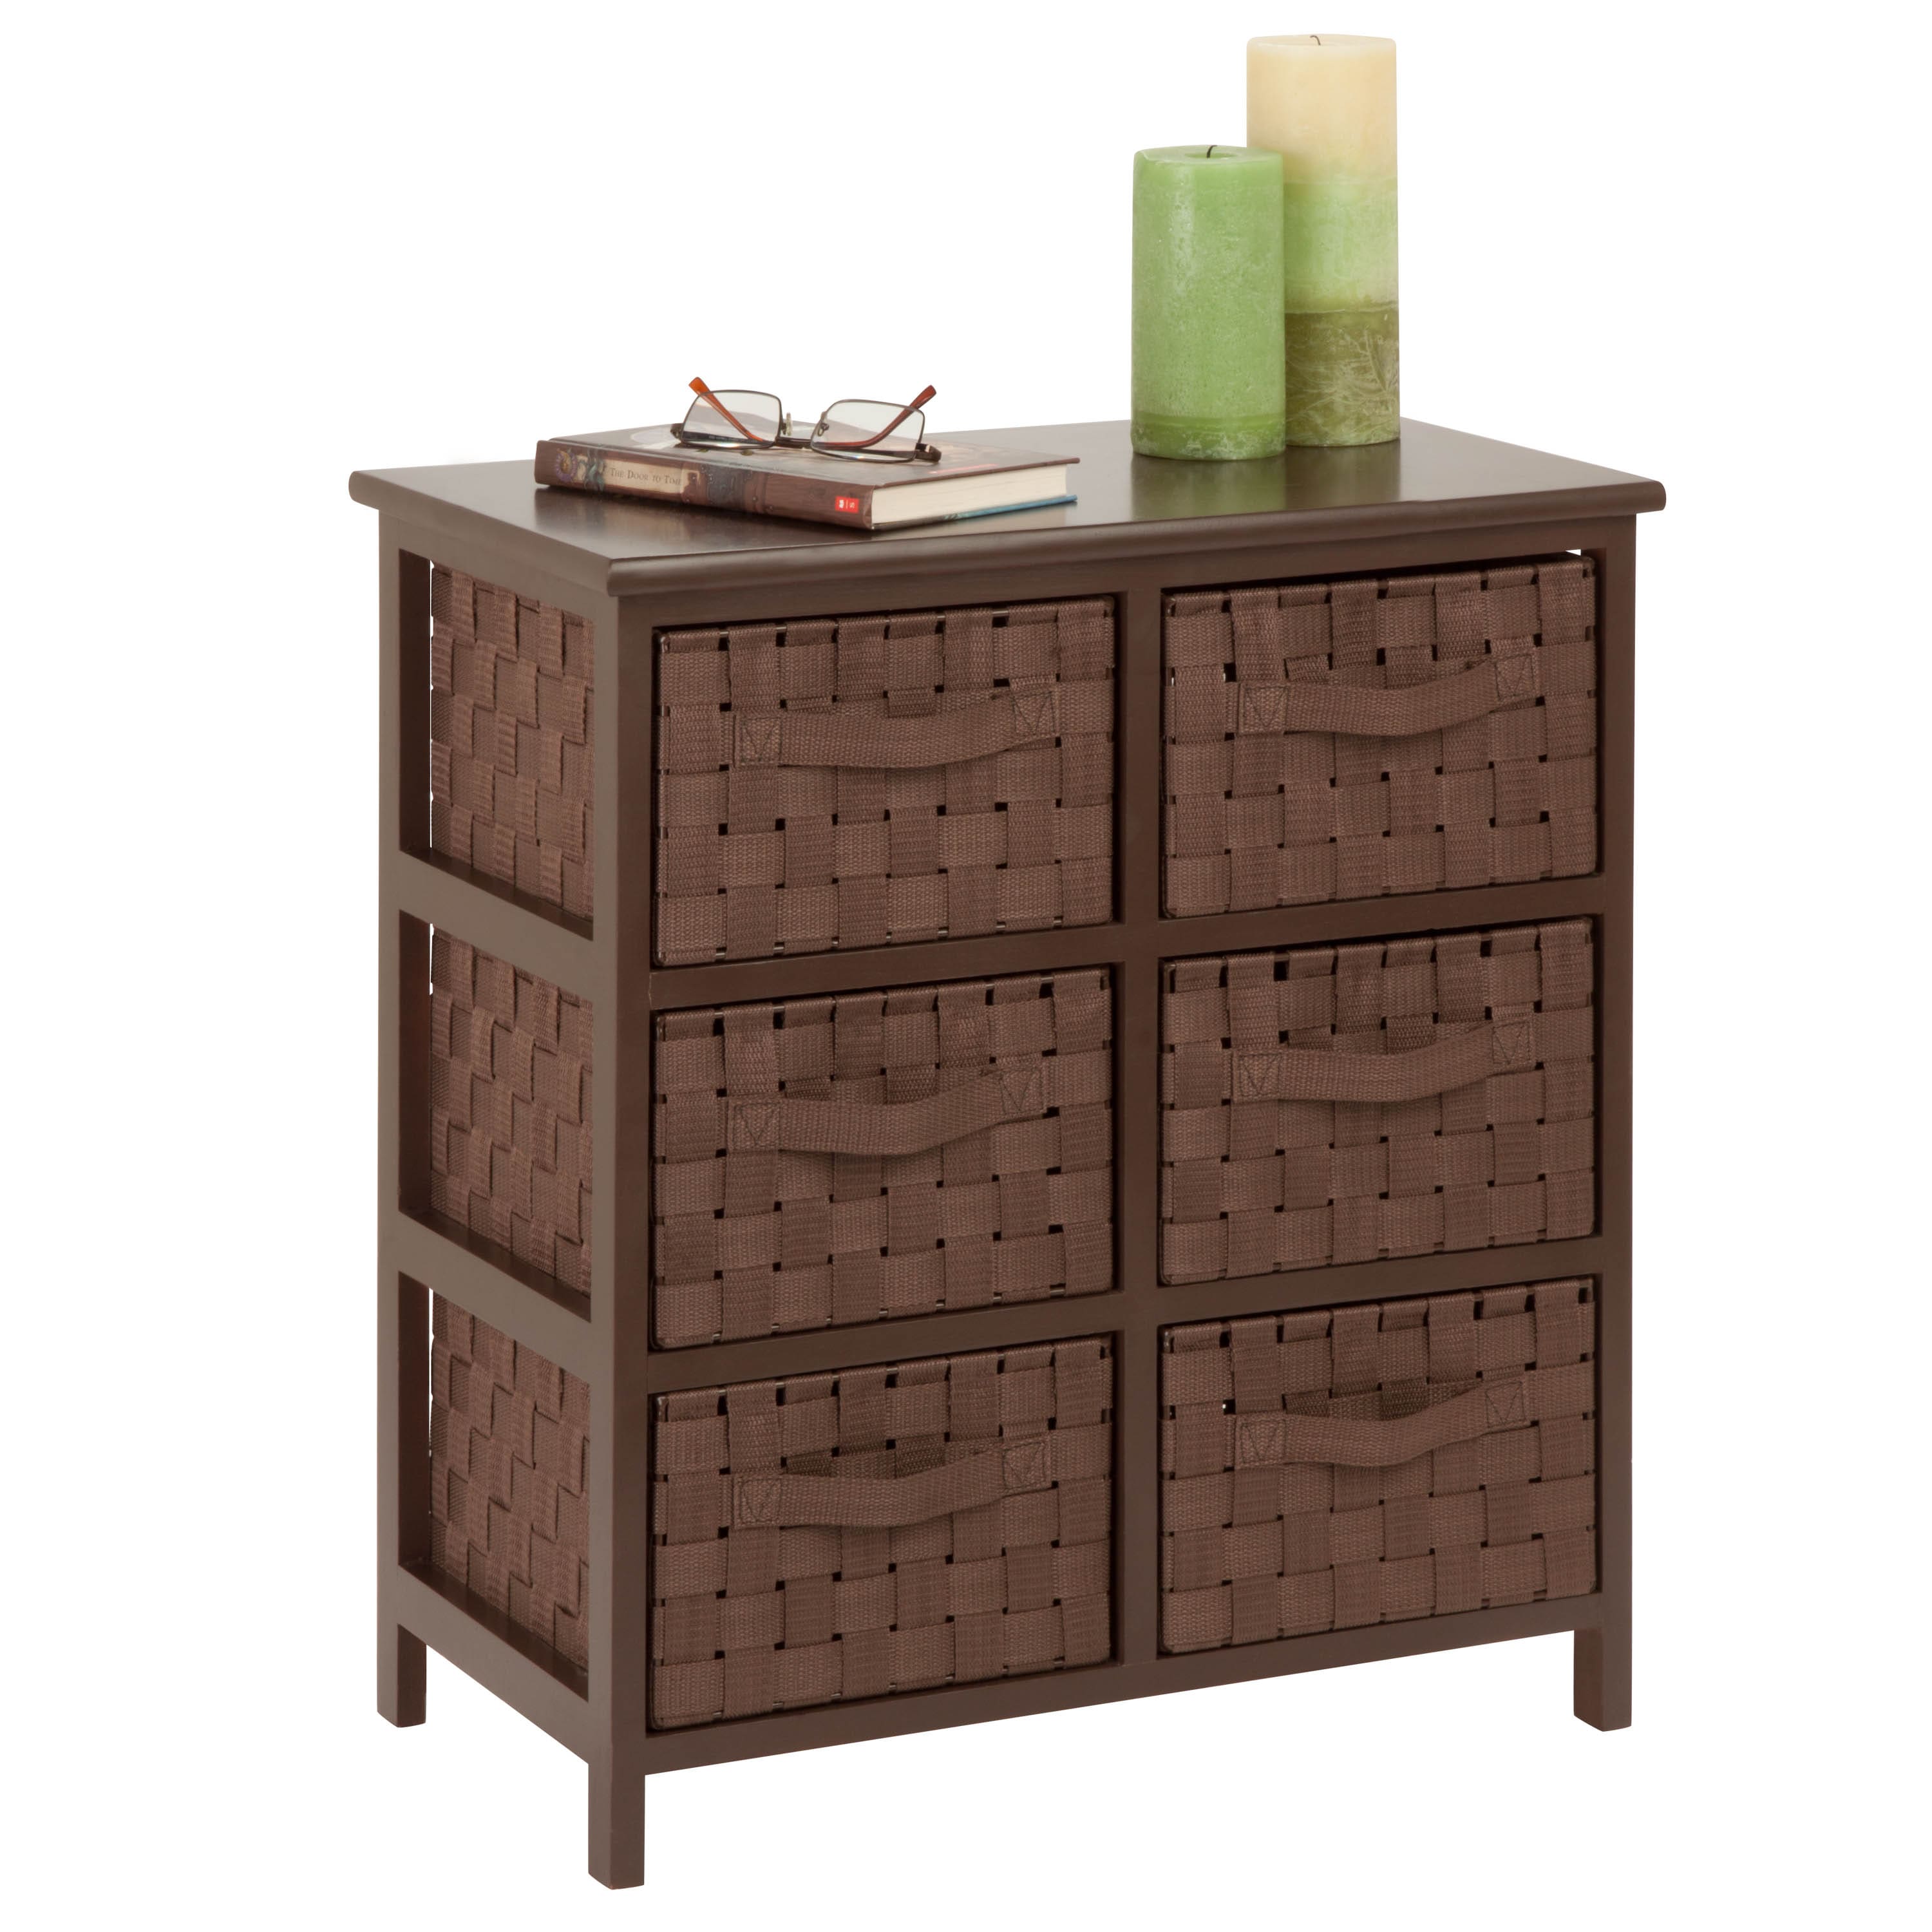 6 Pack: Honey Can Do Brown 6 Drawer Woven Strap Storage Chest